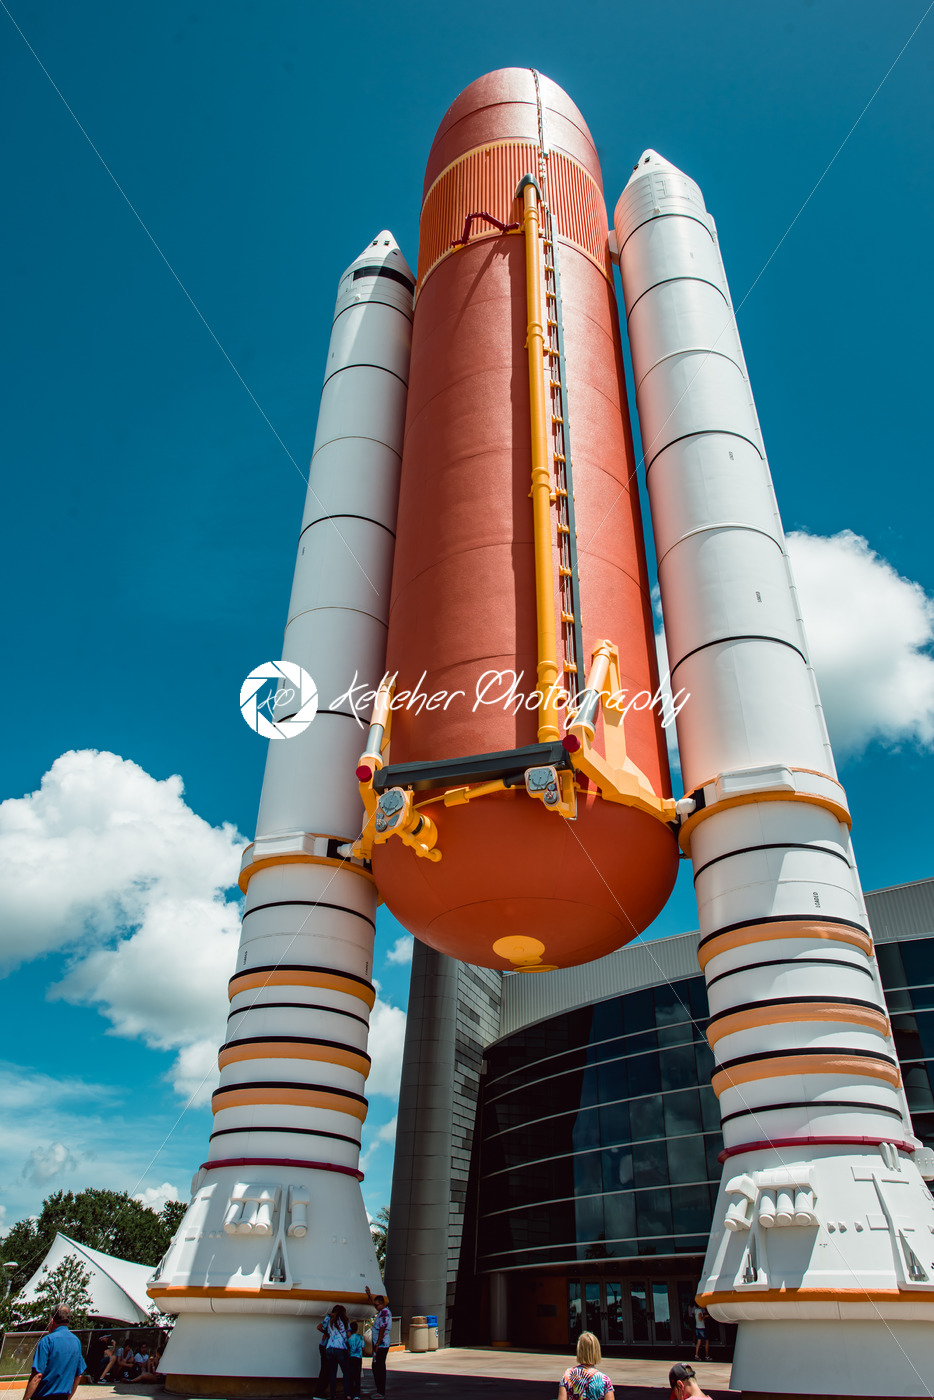 Cape Canaveral, Florida – August 13, 2018: Atlantis Space Shuttle Rocket Booster at NASA Kennedy Space Center - Kelleher Photography Store